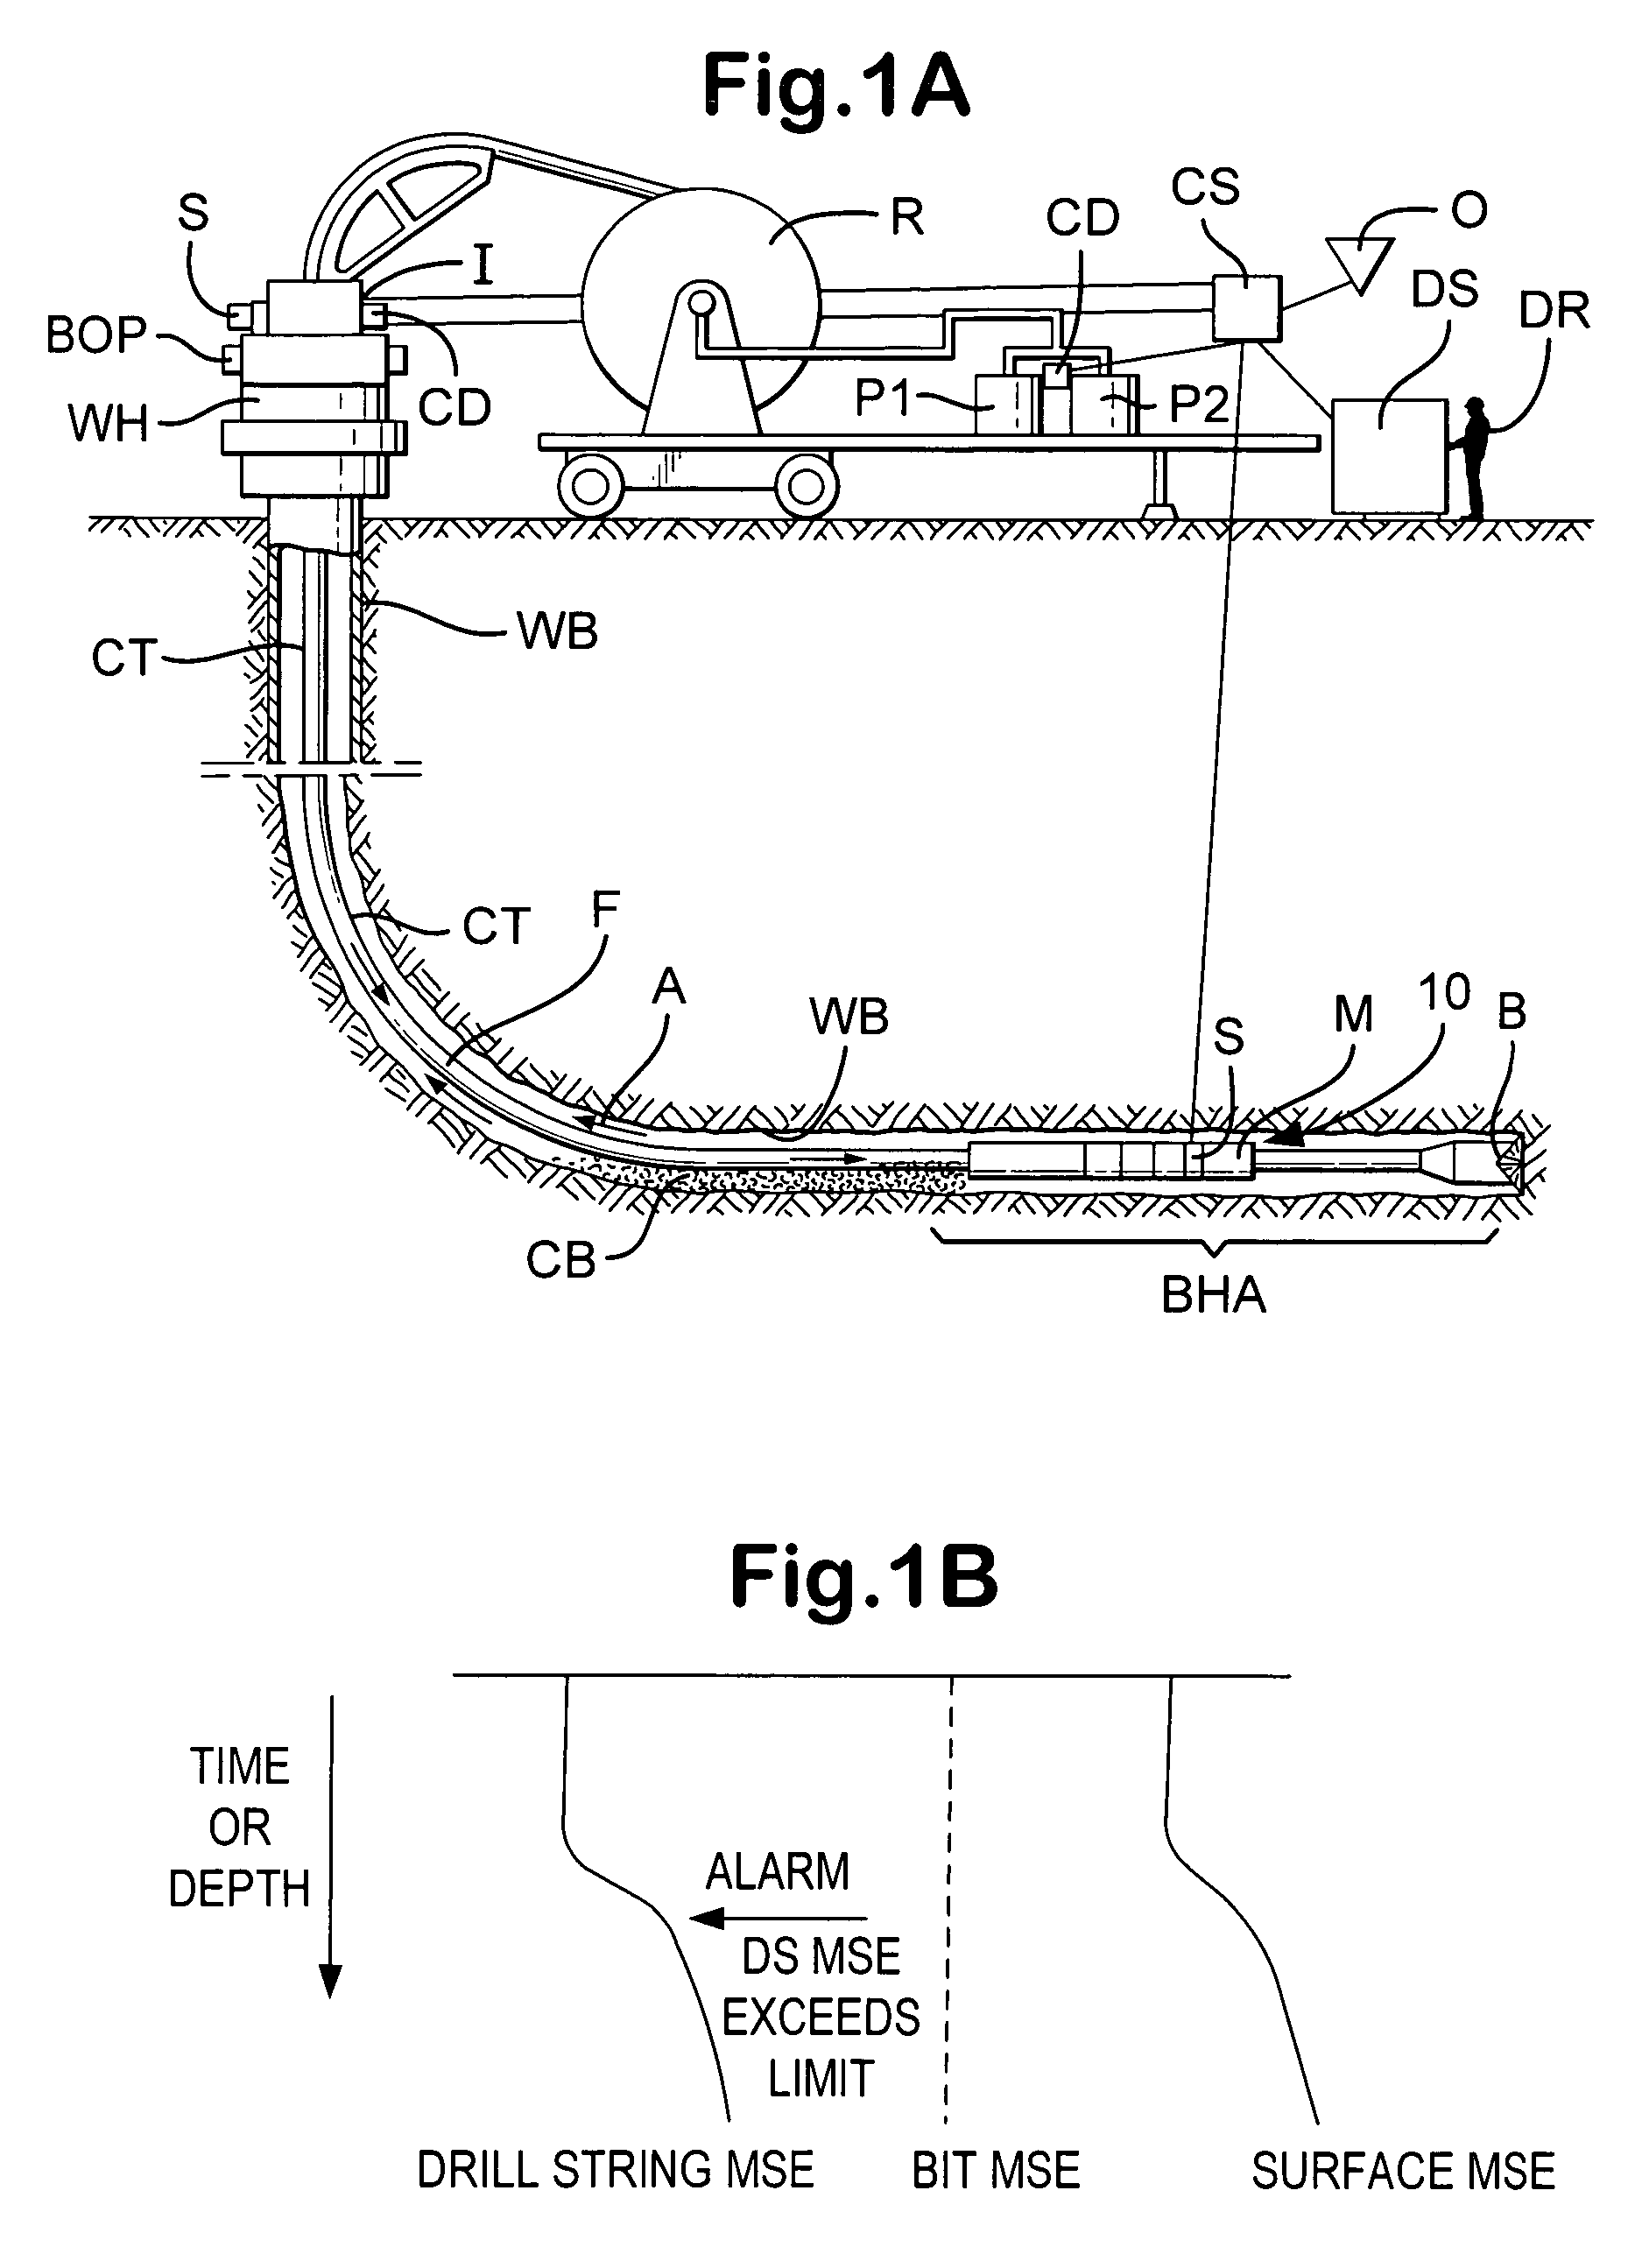 Wellbore operations monitoring and control systems and methods